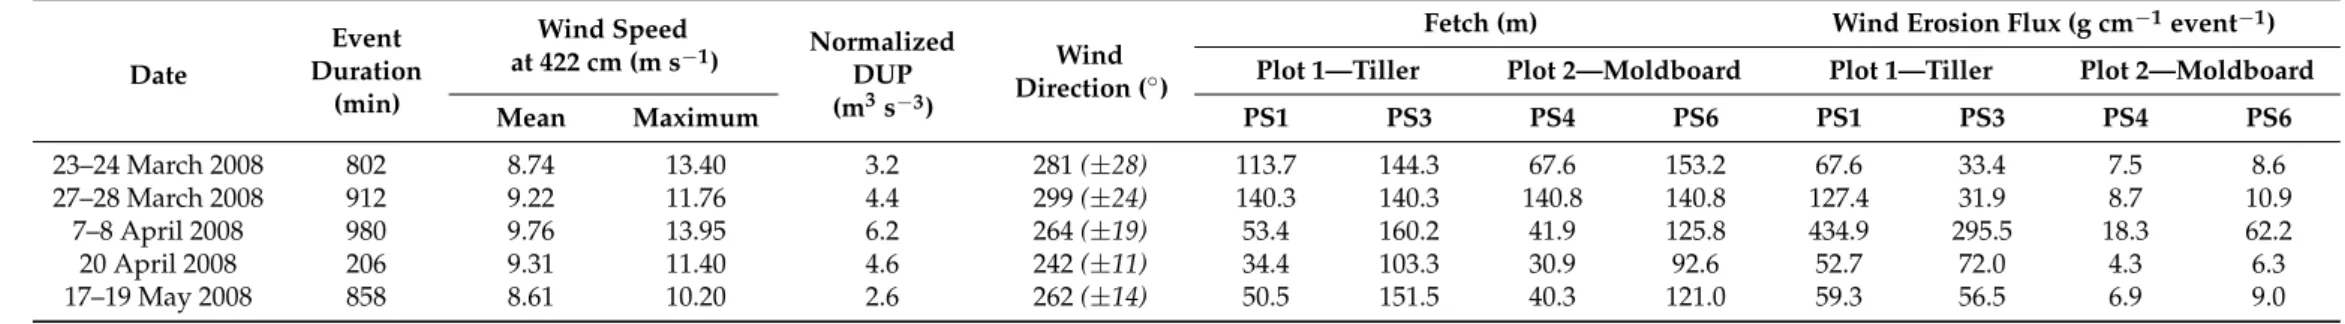 Table 2. Main characteristics of the recorded wind erosion events. Event duration corresponds to the time during which wind speed is above the threshold velocity allowing wind erosion (7.47 m s −1 at 422 cm)